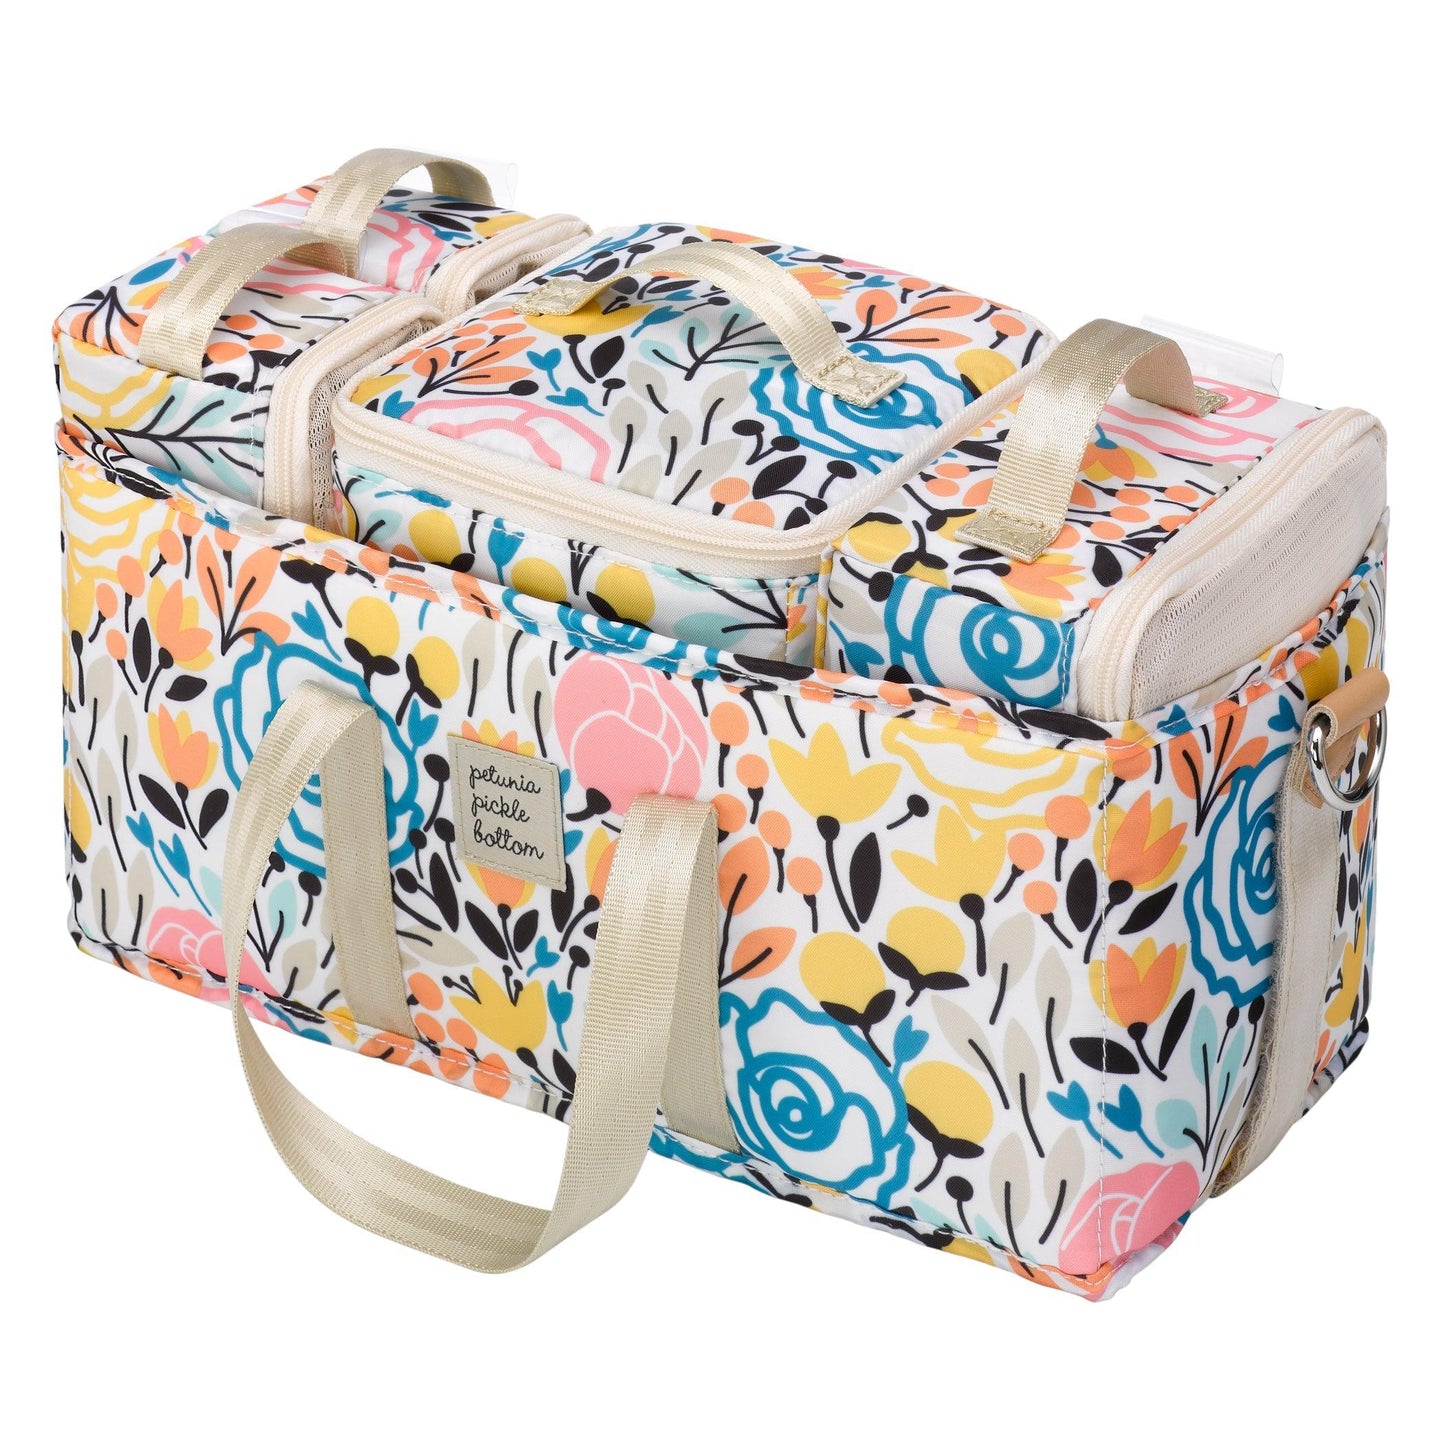 Petunia Pickle Bottom Inter-Mix System Deluxe Kit in Happy Meadow Diaper Caddie